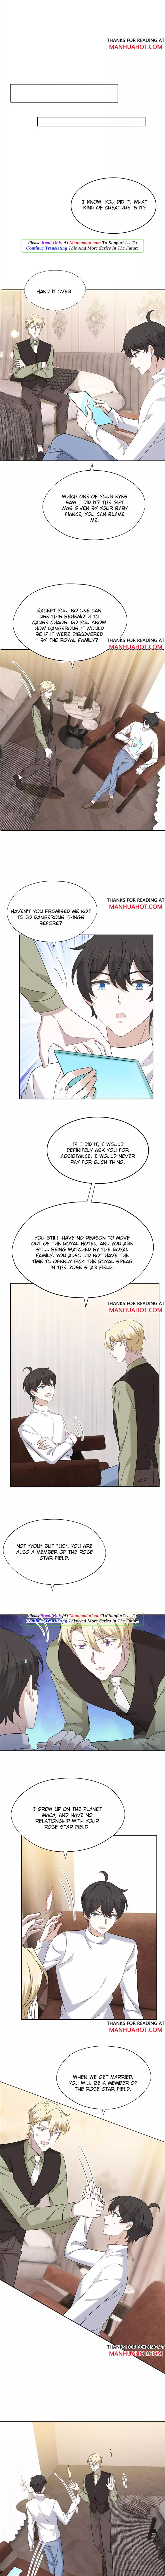 Evenly Matched Love - 110 page 4-fe4456f5